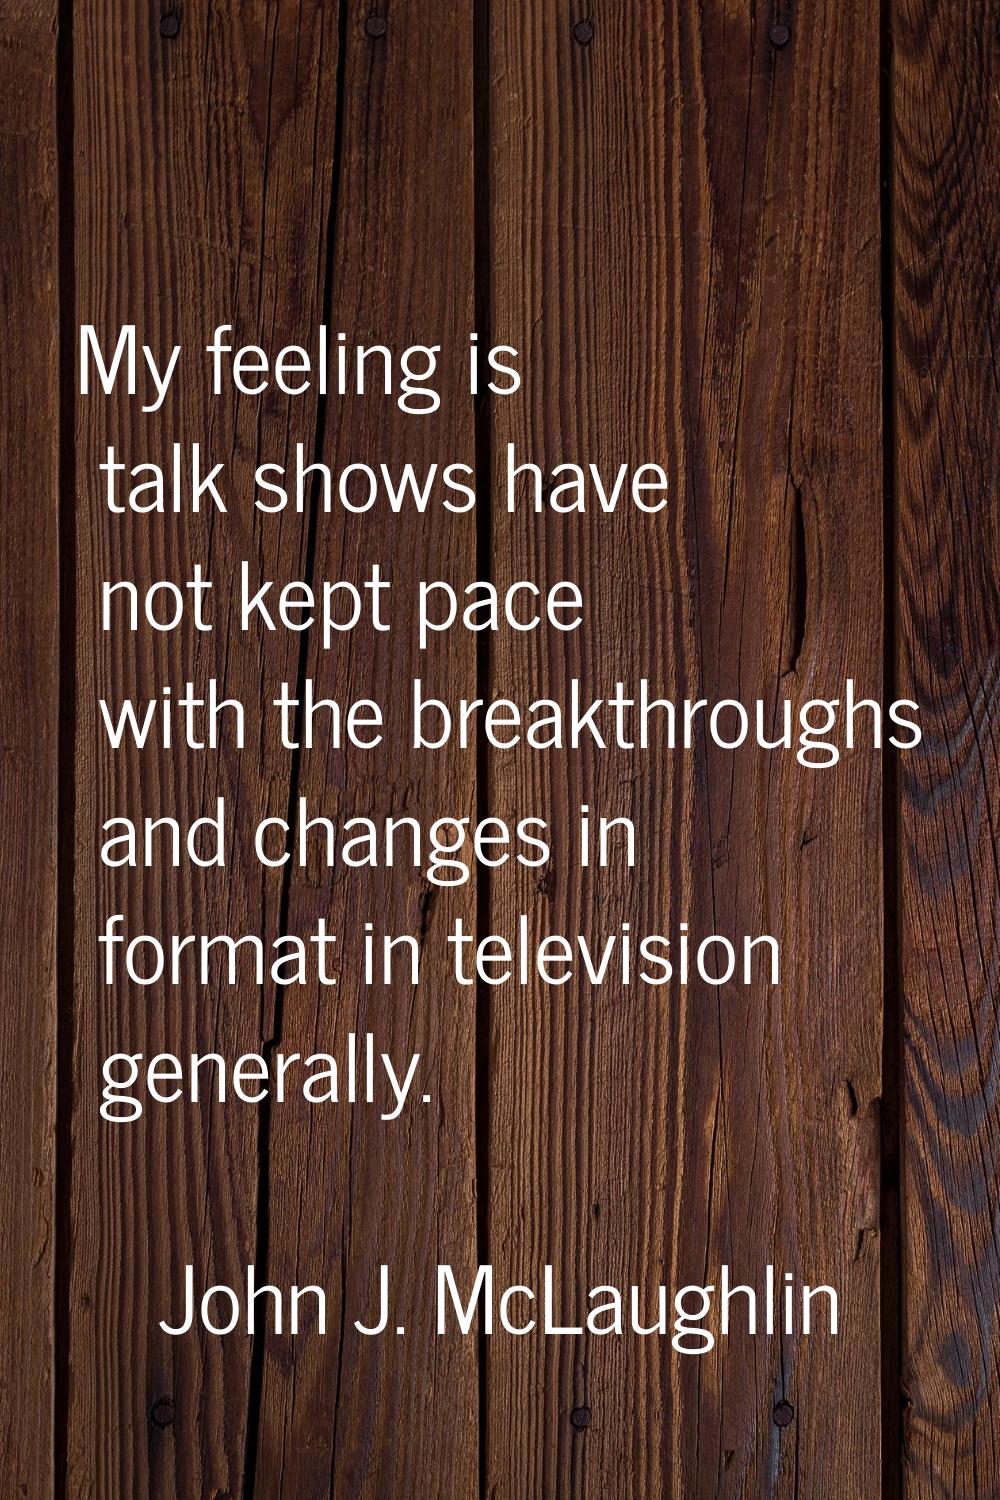 My feeling is talk shows have not kept pace with the breakthroughs and changes in format in televis